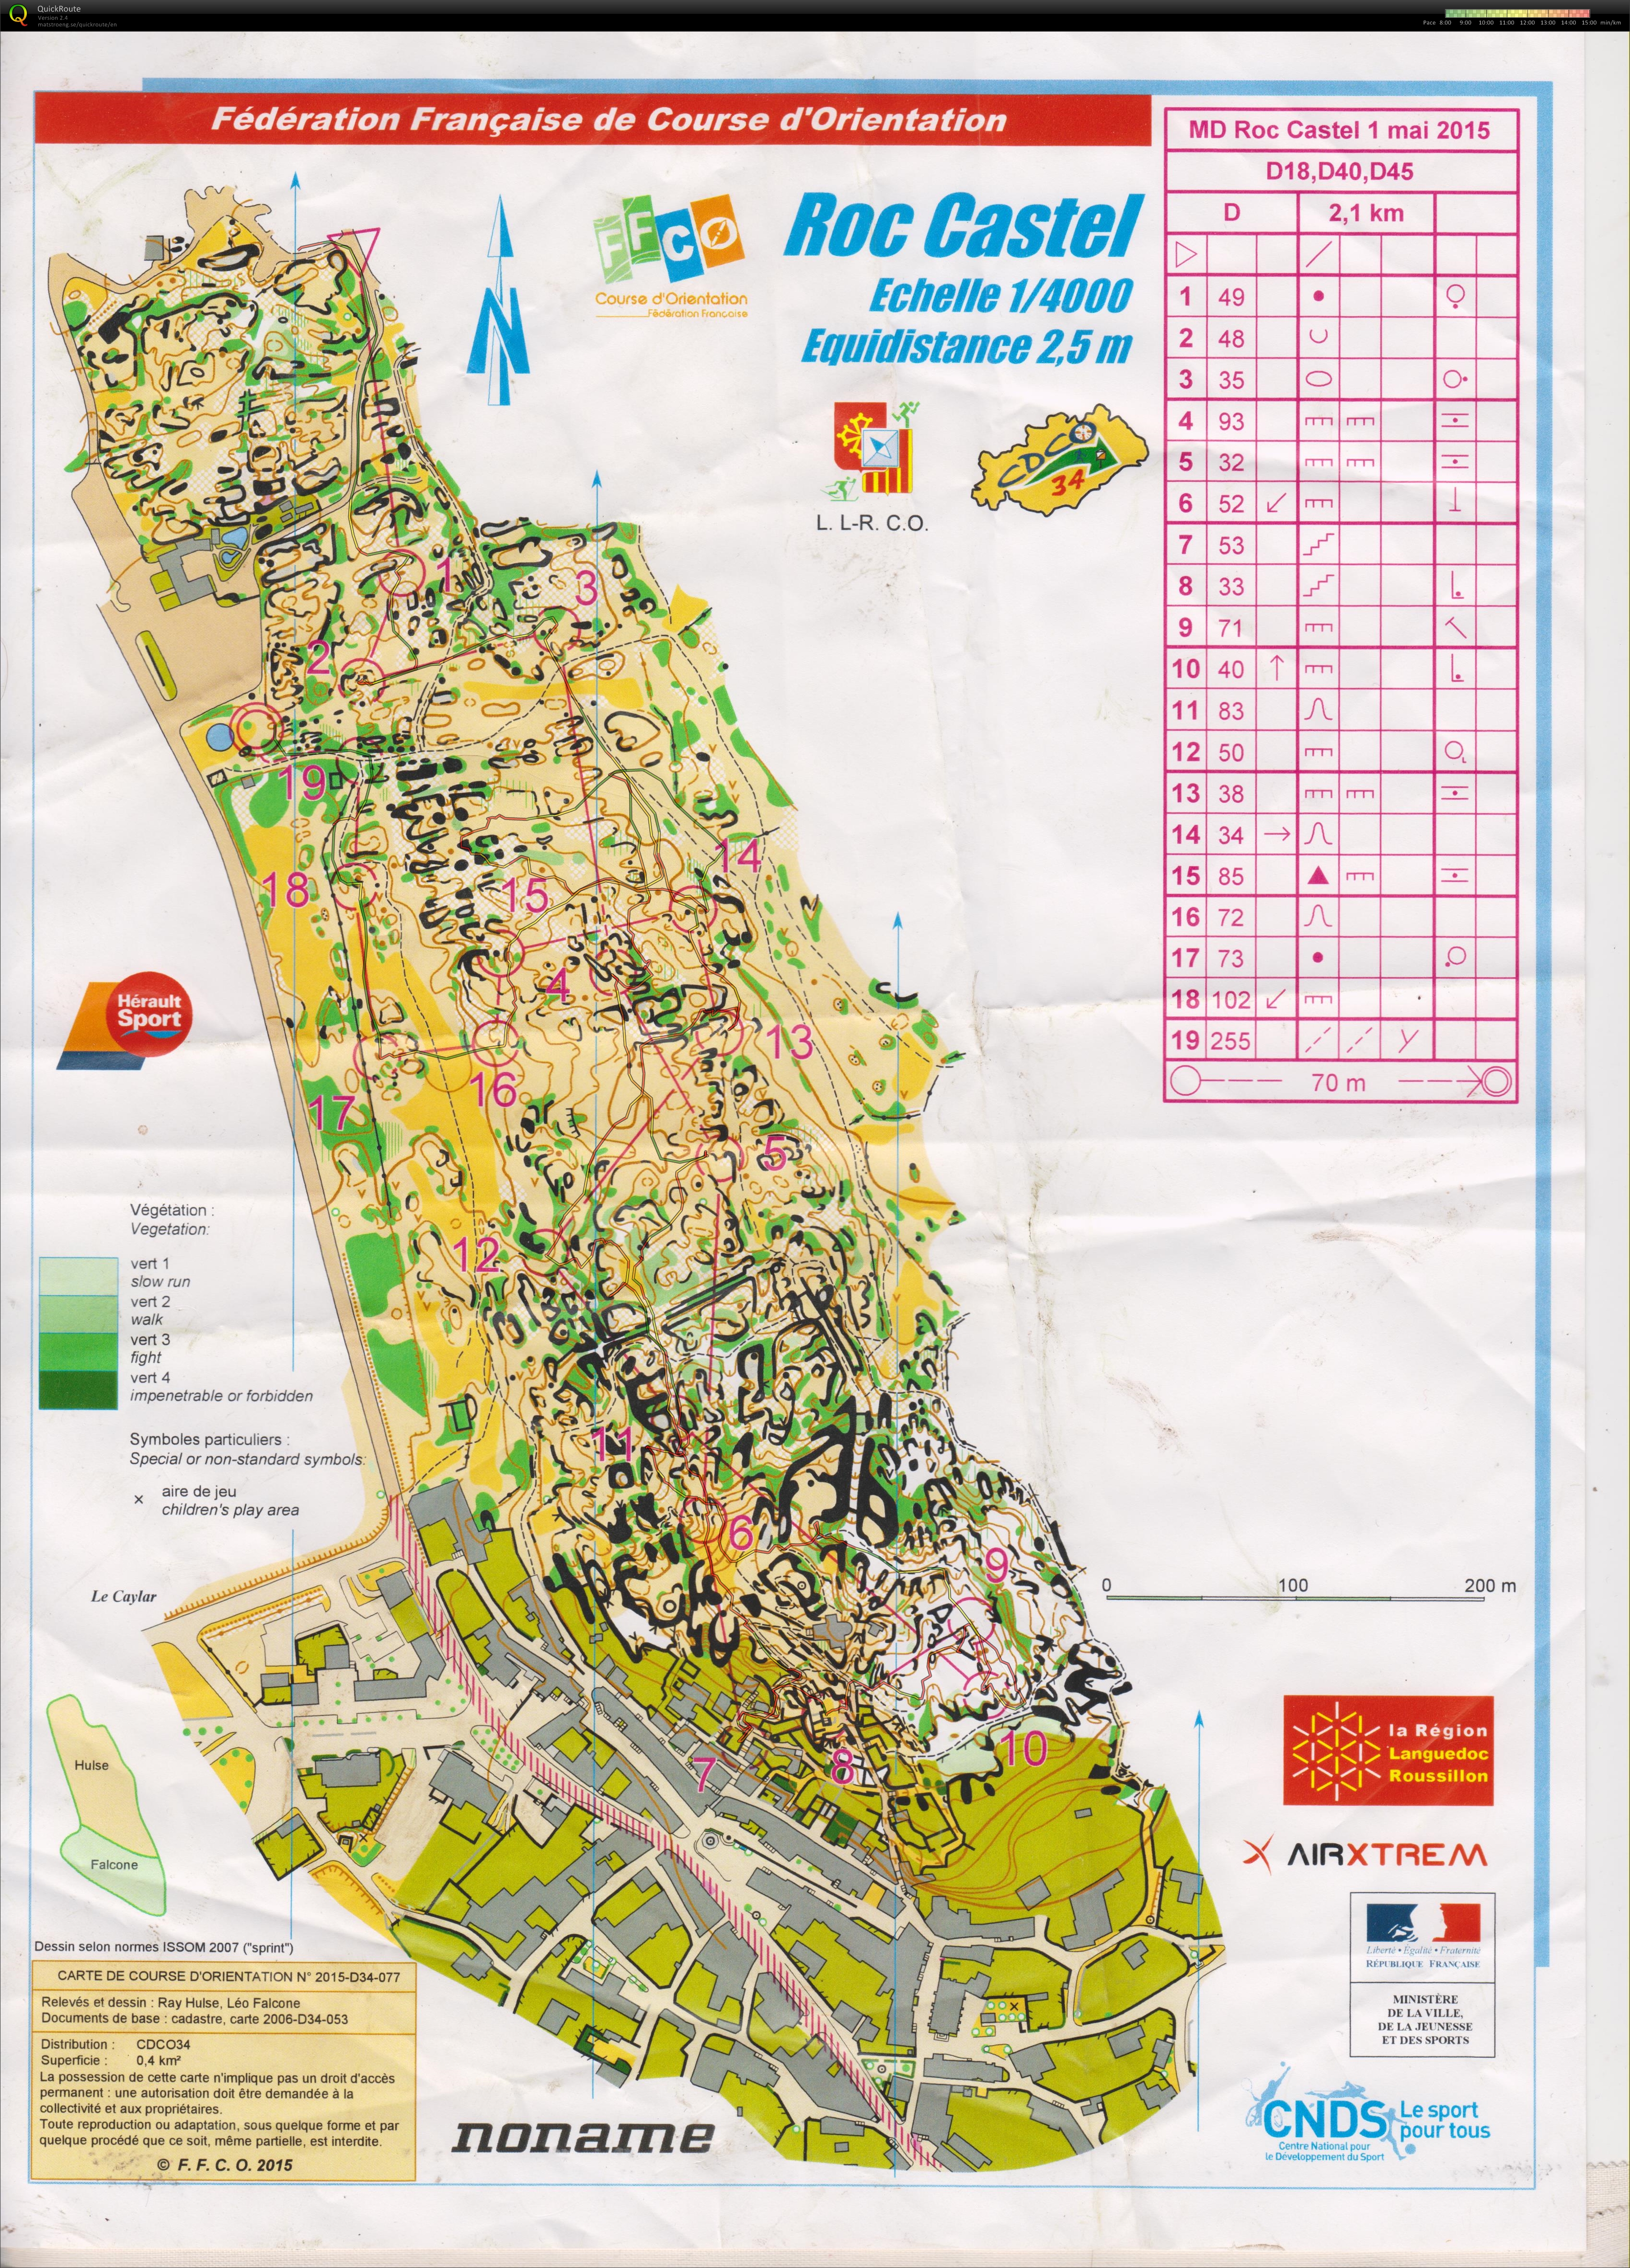 Nationale SO Larzac D18 - Day 1 - Le Caylar (01-05-2015)